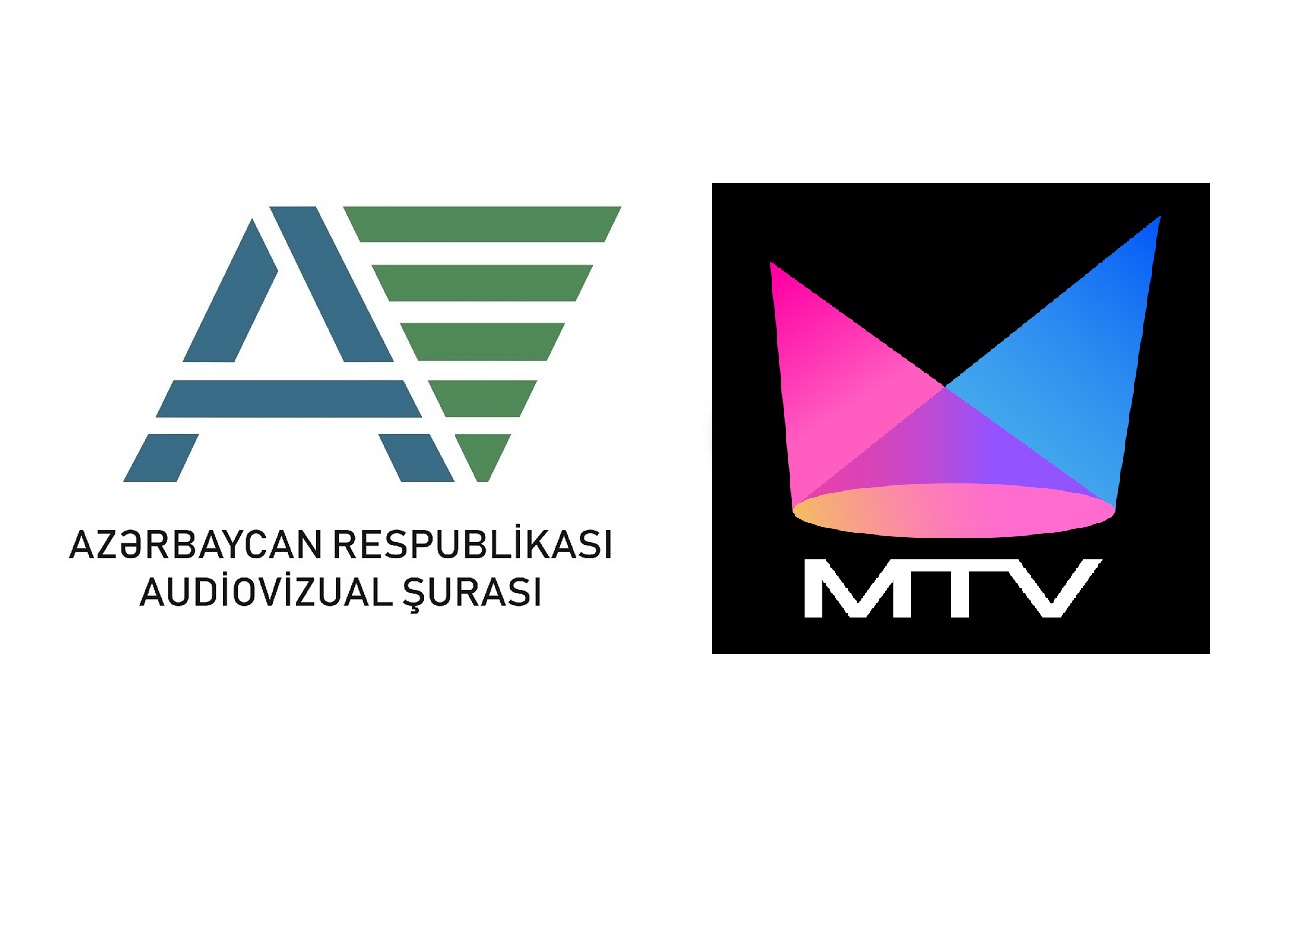 The Audiovisual Council of the Republic of Azerbaijan adopted a decision to suspend broadcasting of "MTV" channel for 8 hours